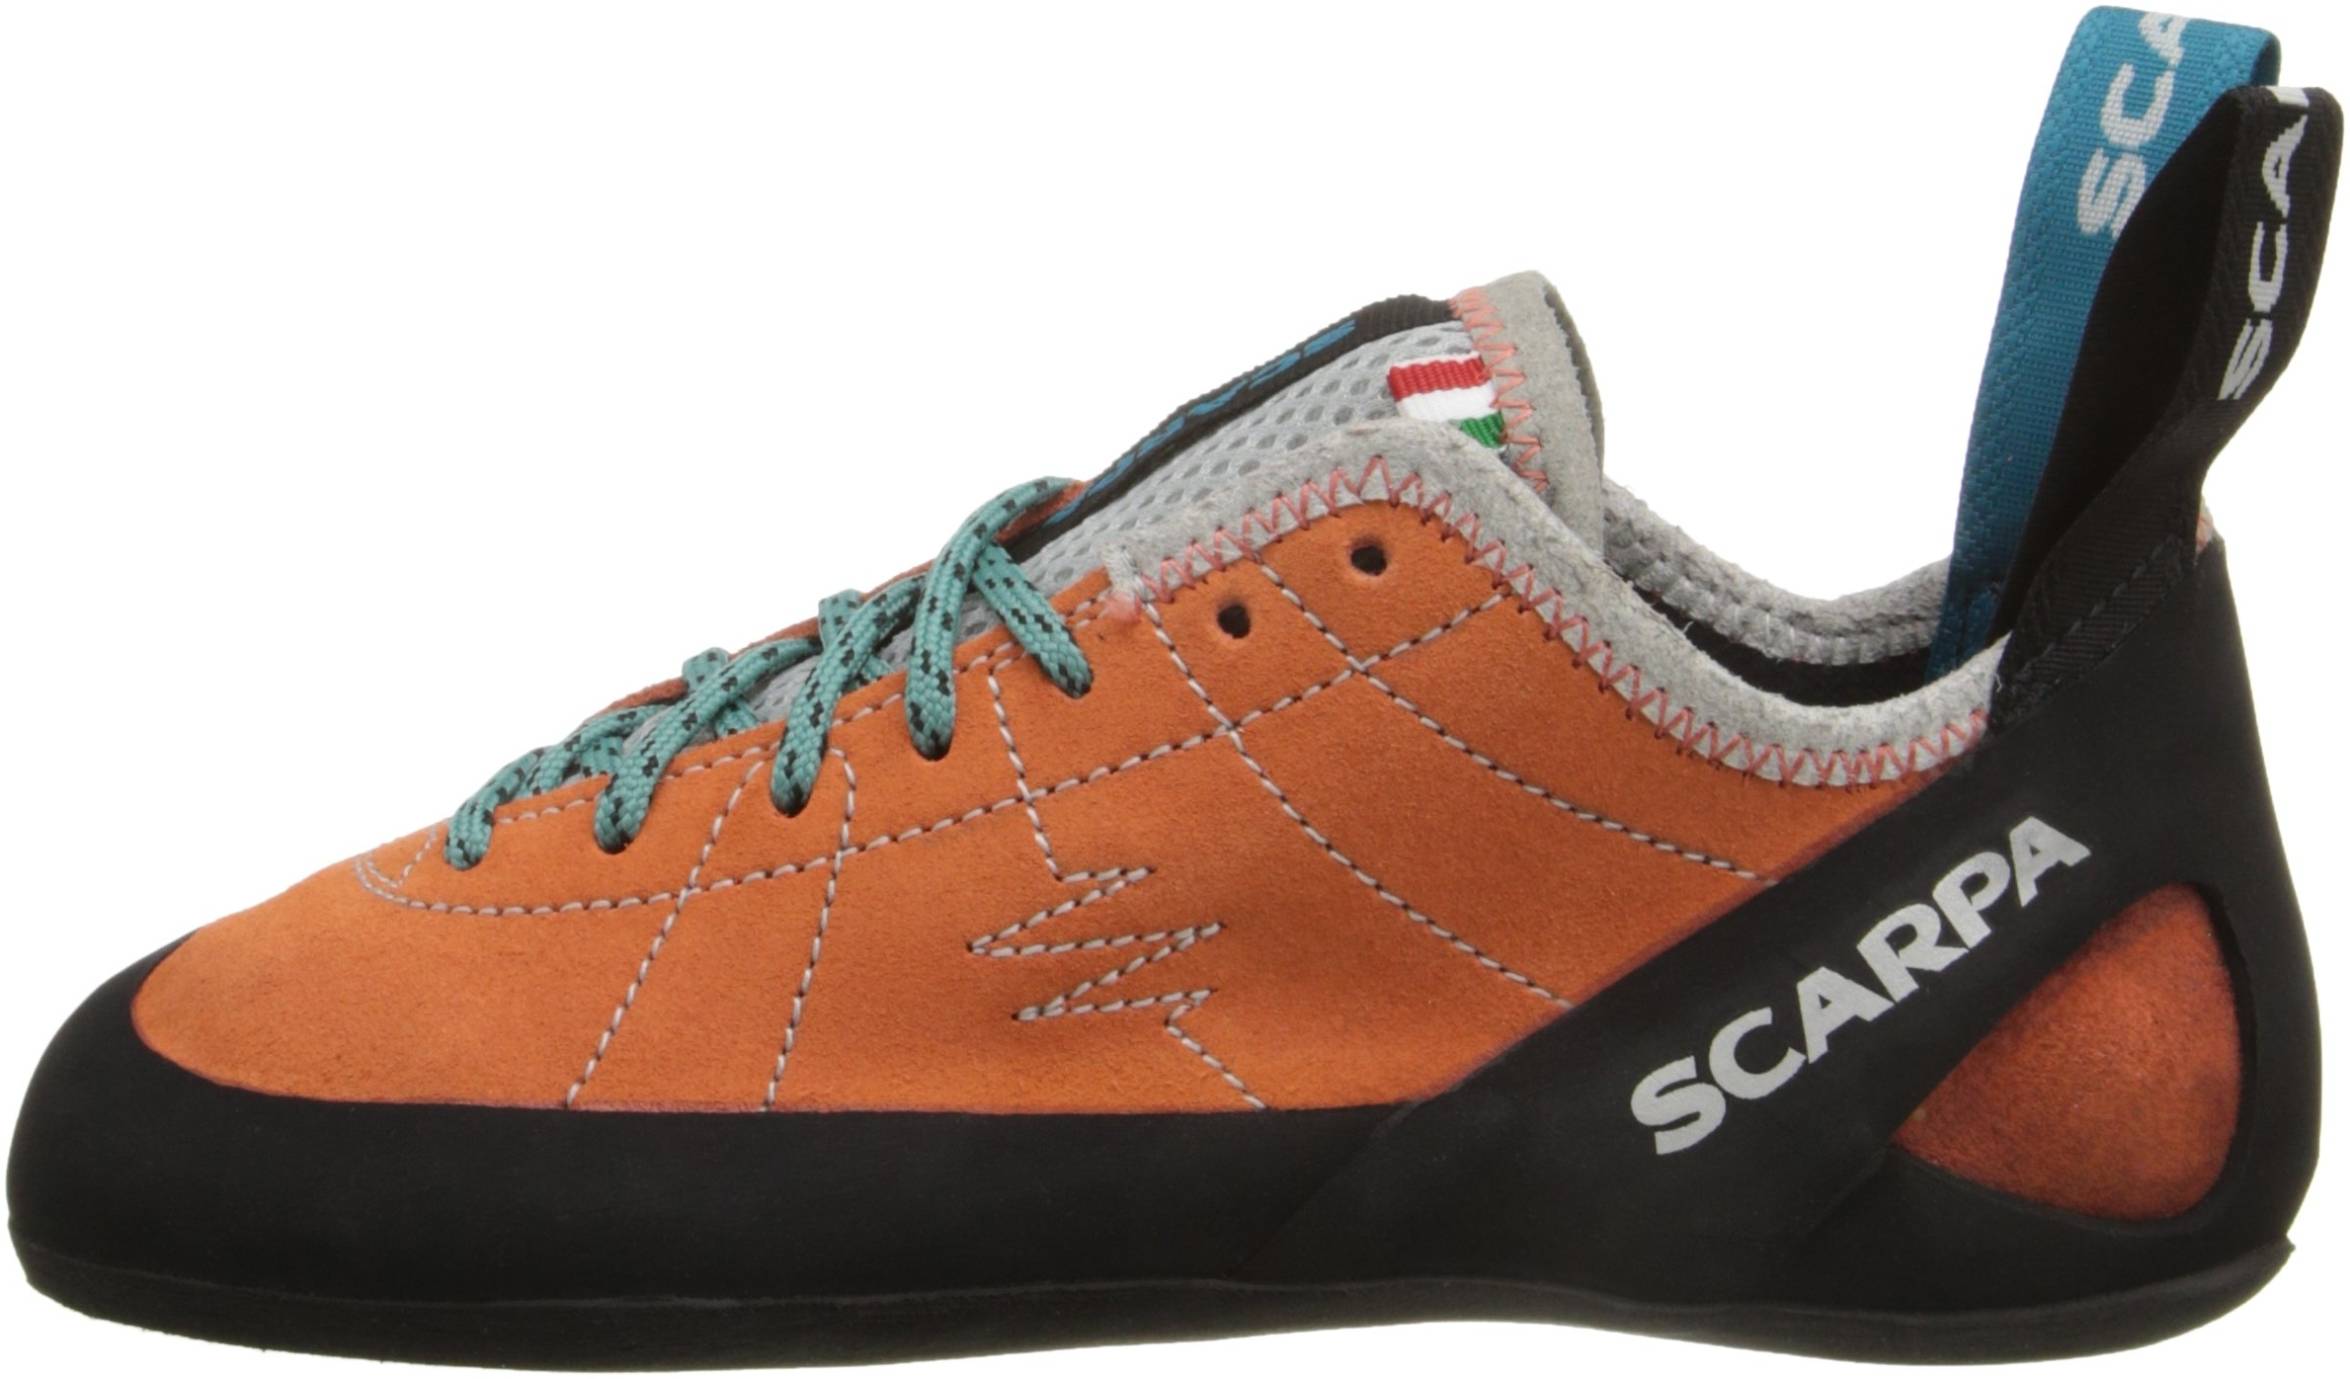 Only $75 + Review of Scarpa Helix 